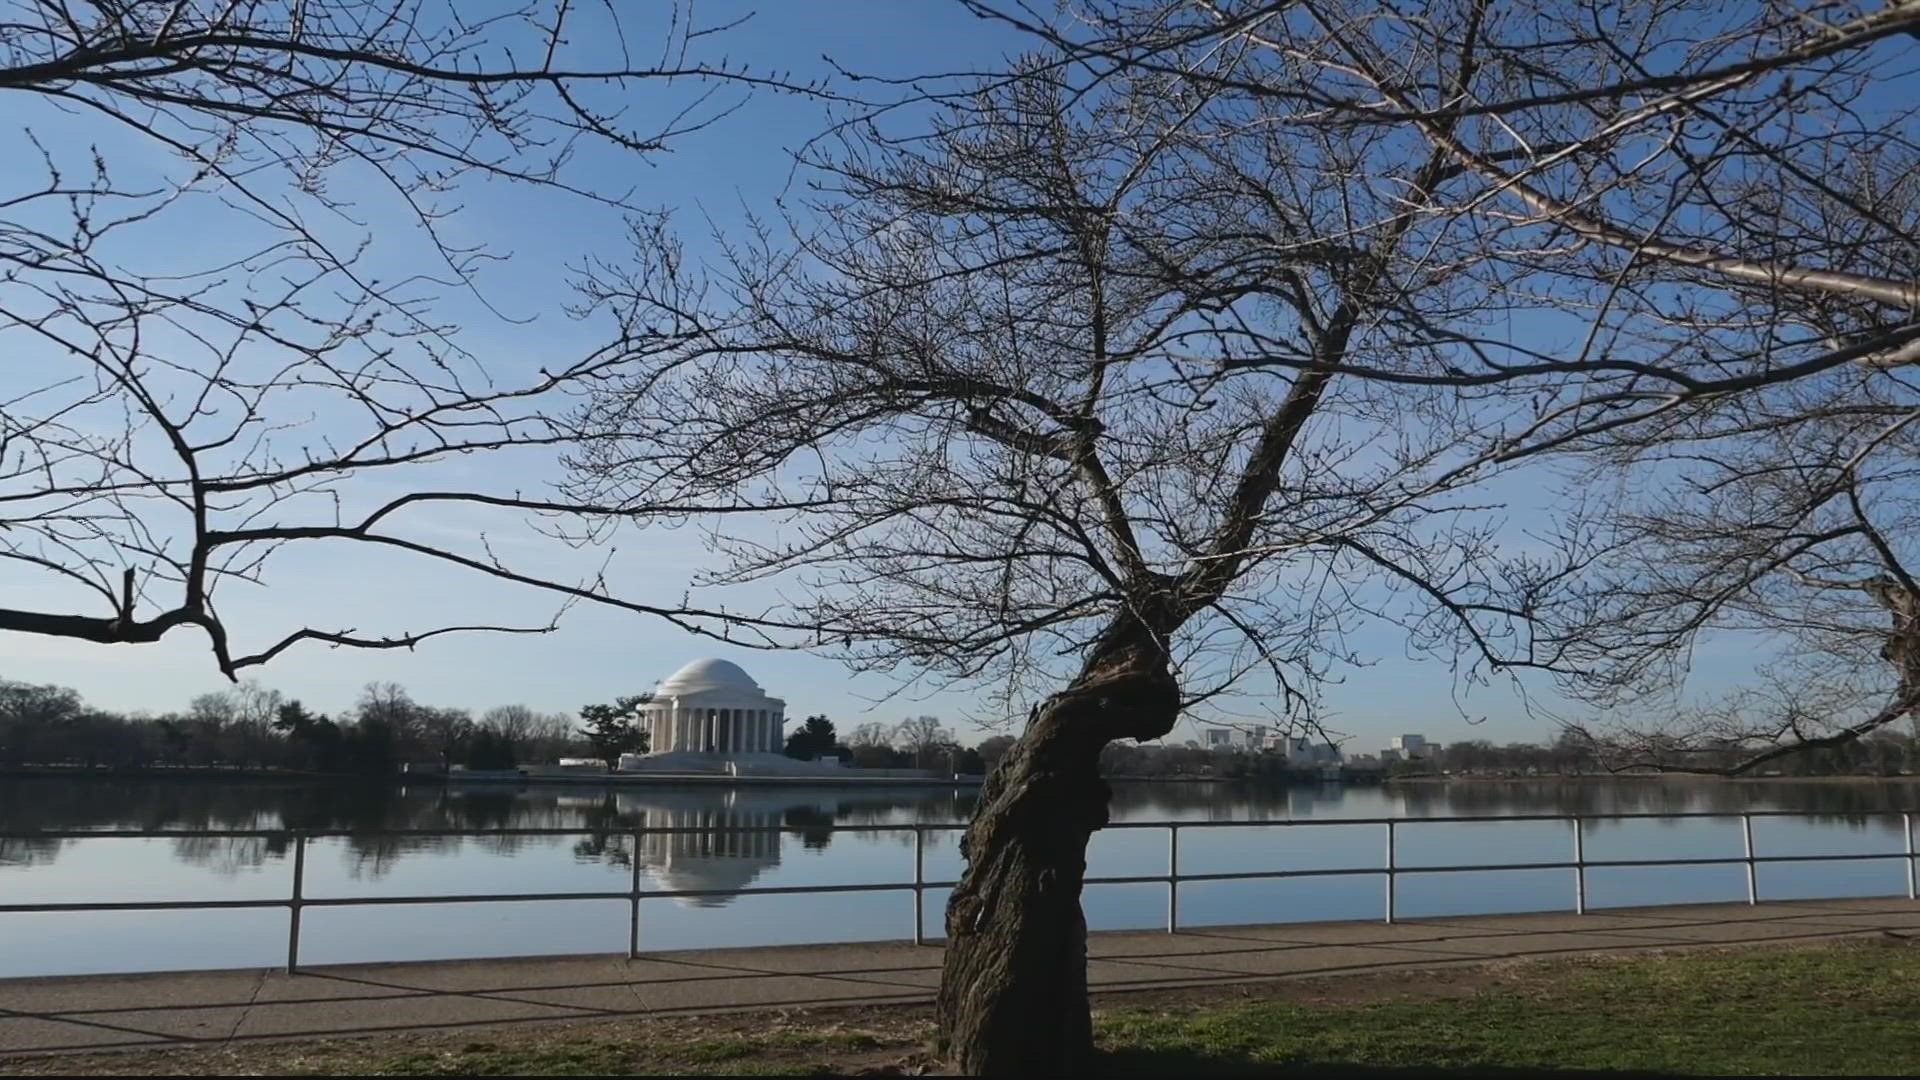 One week from today, we’ll learn from the National Park Service when they expect the beloved cherry blossoms around the tidal basin to hit peak bloom.